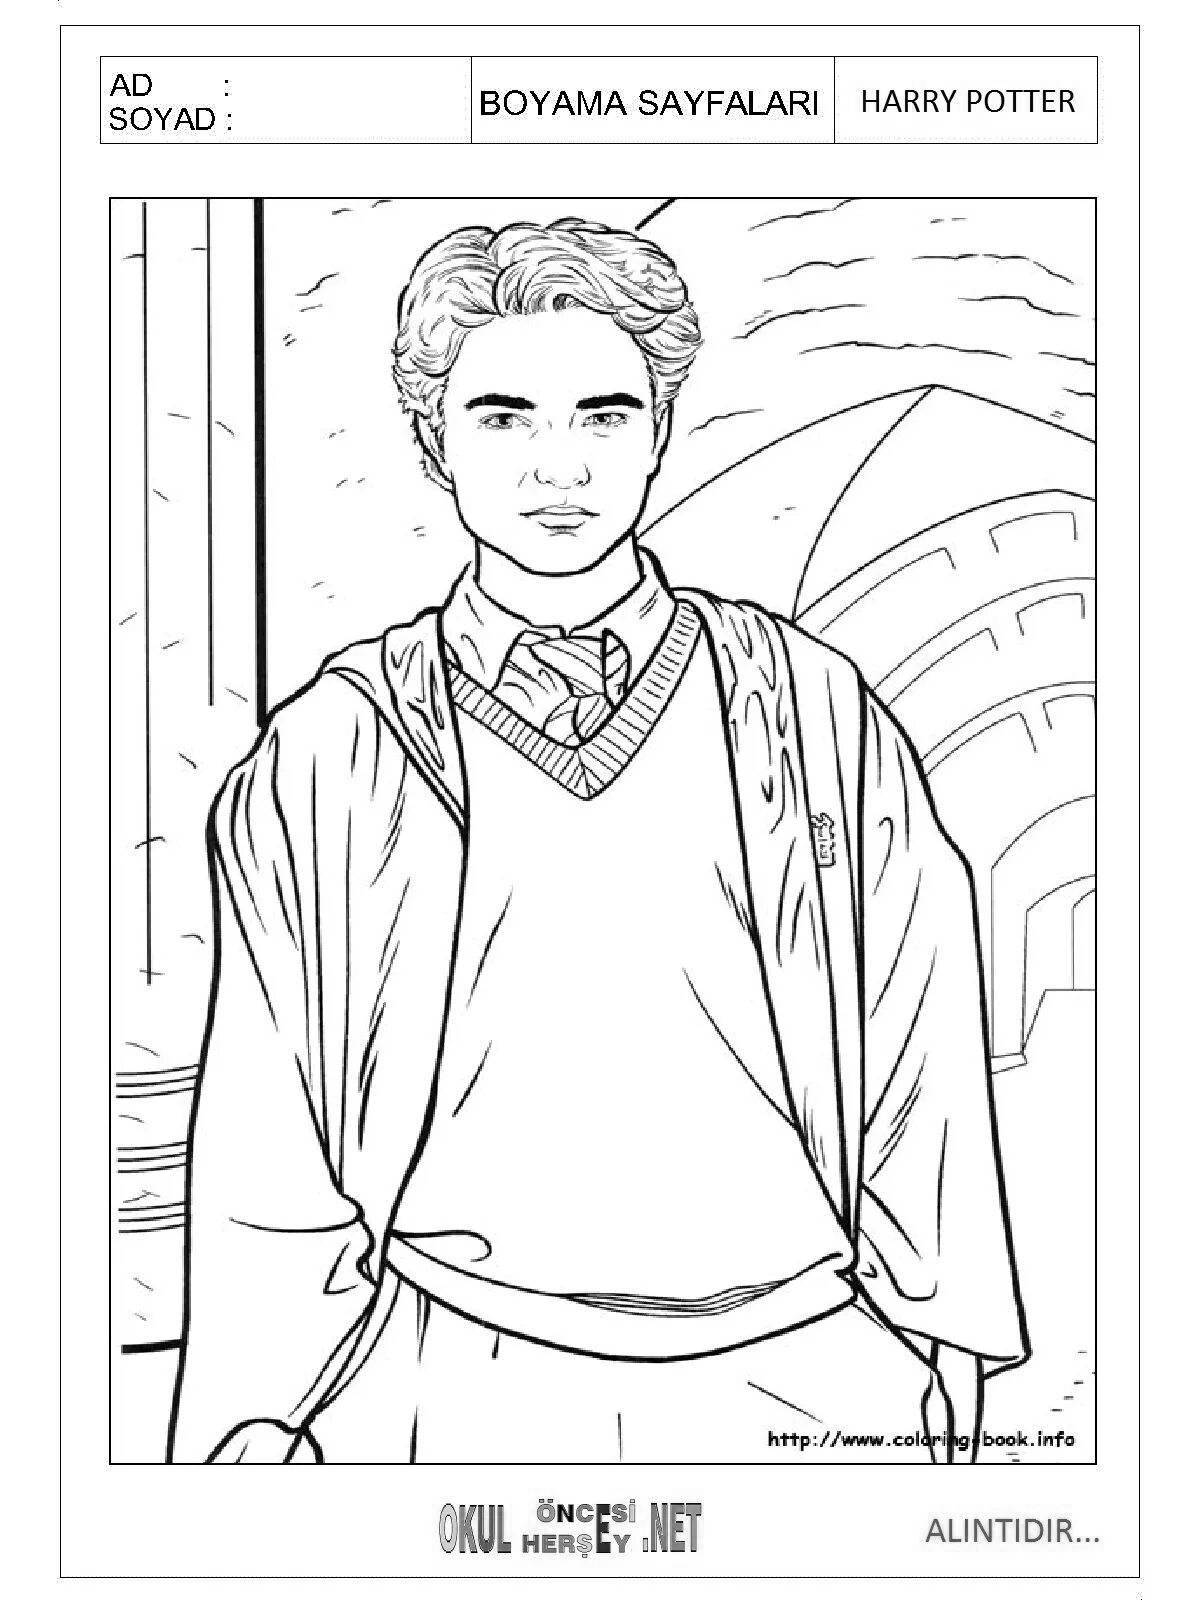 Draco Malfoy's elegant harry potter coloring book